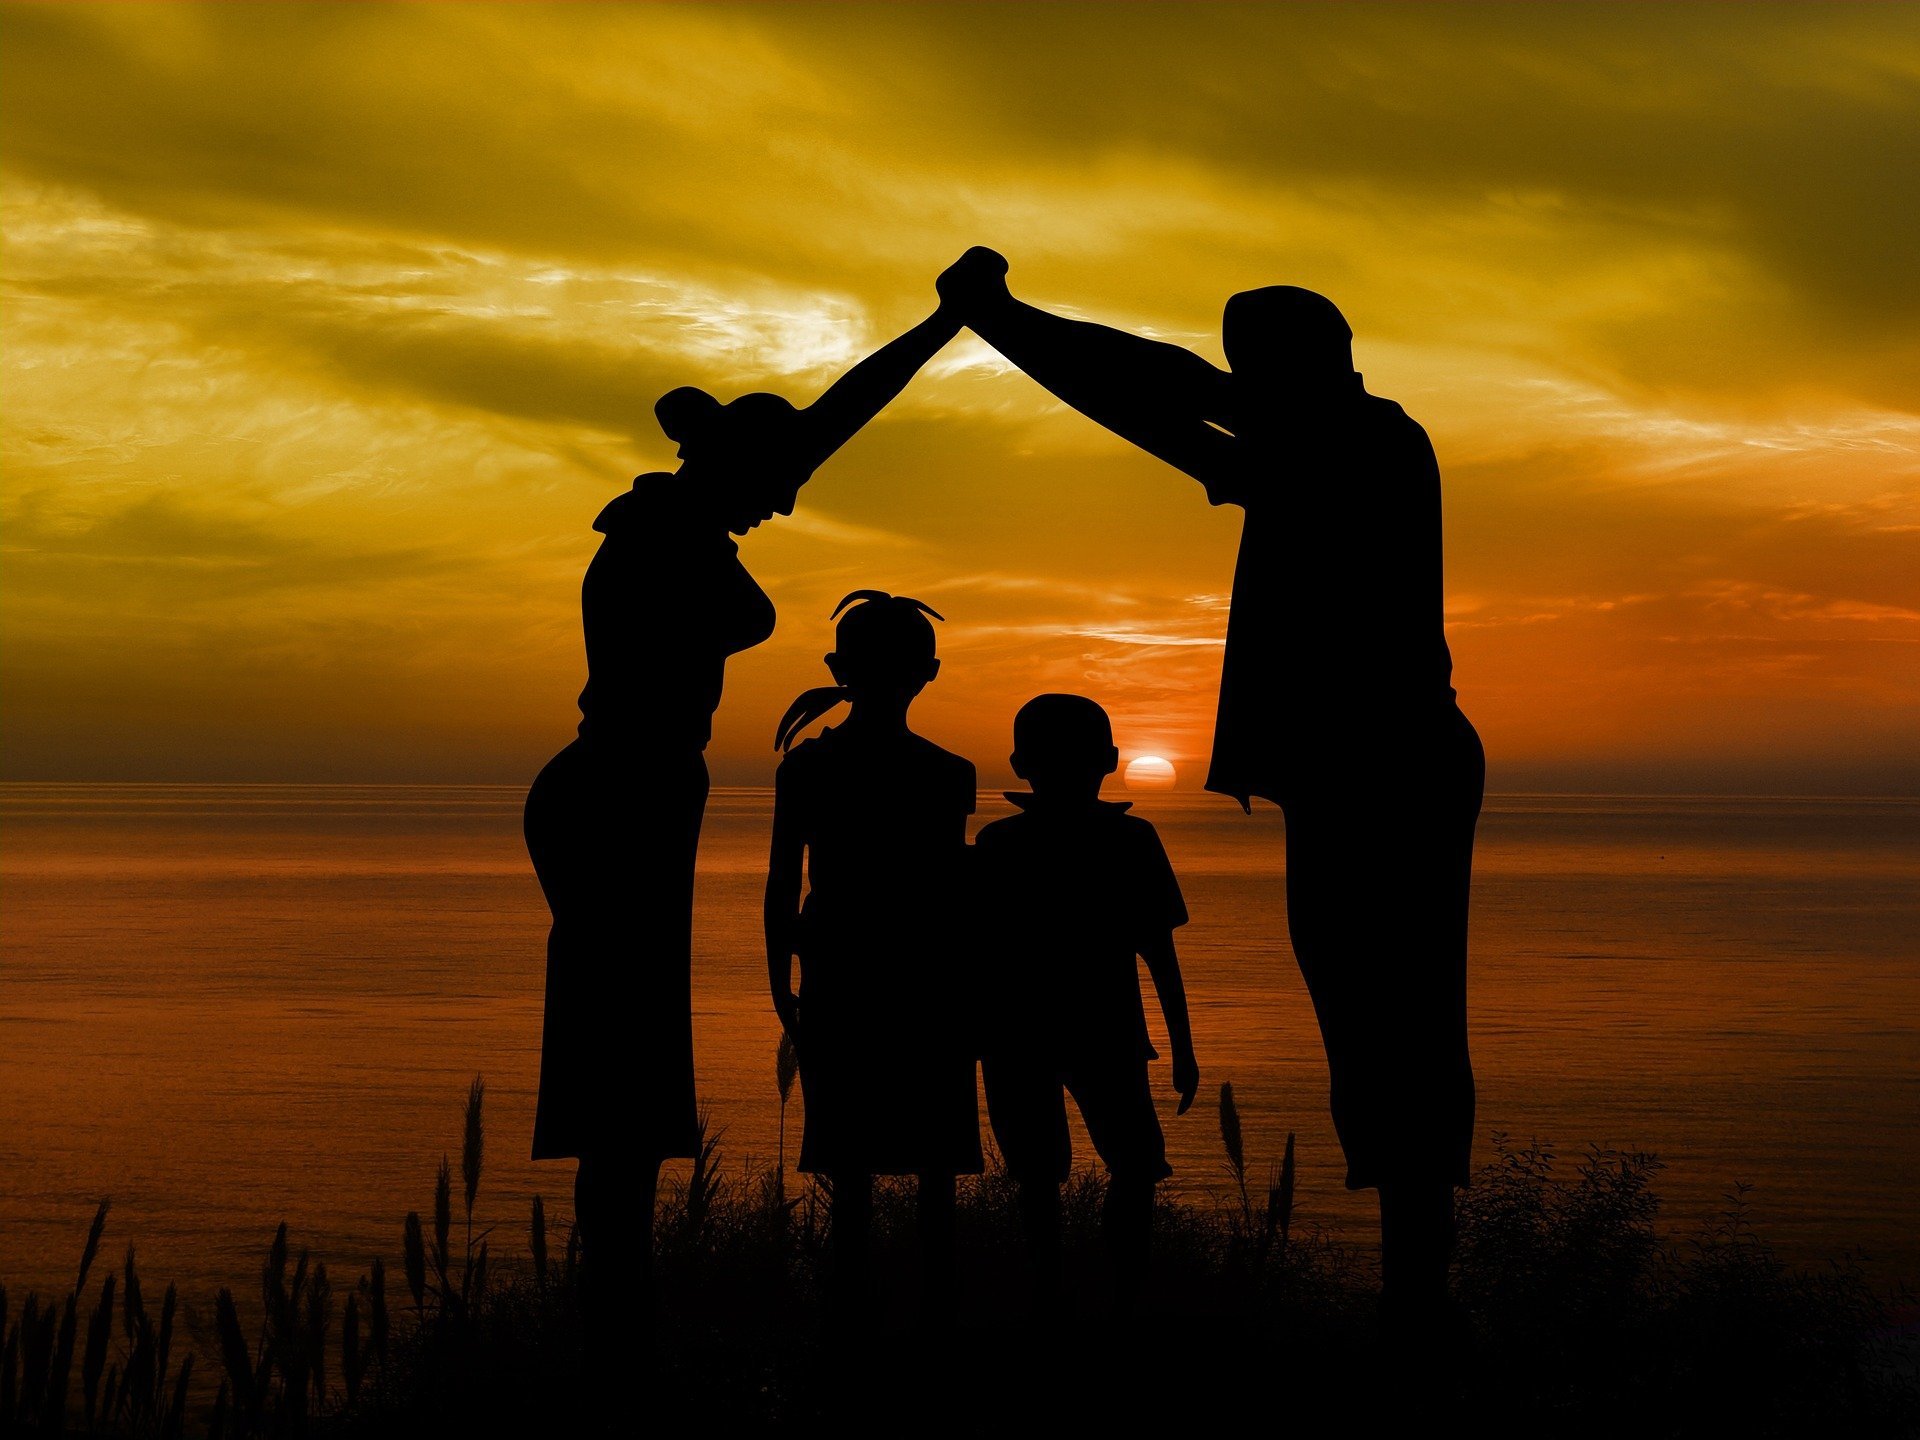 A silhouette of a family during sunset | Source: Pixabay